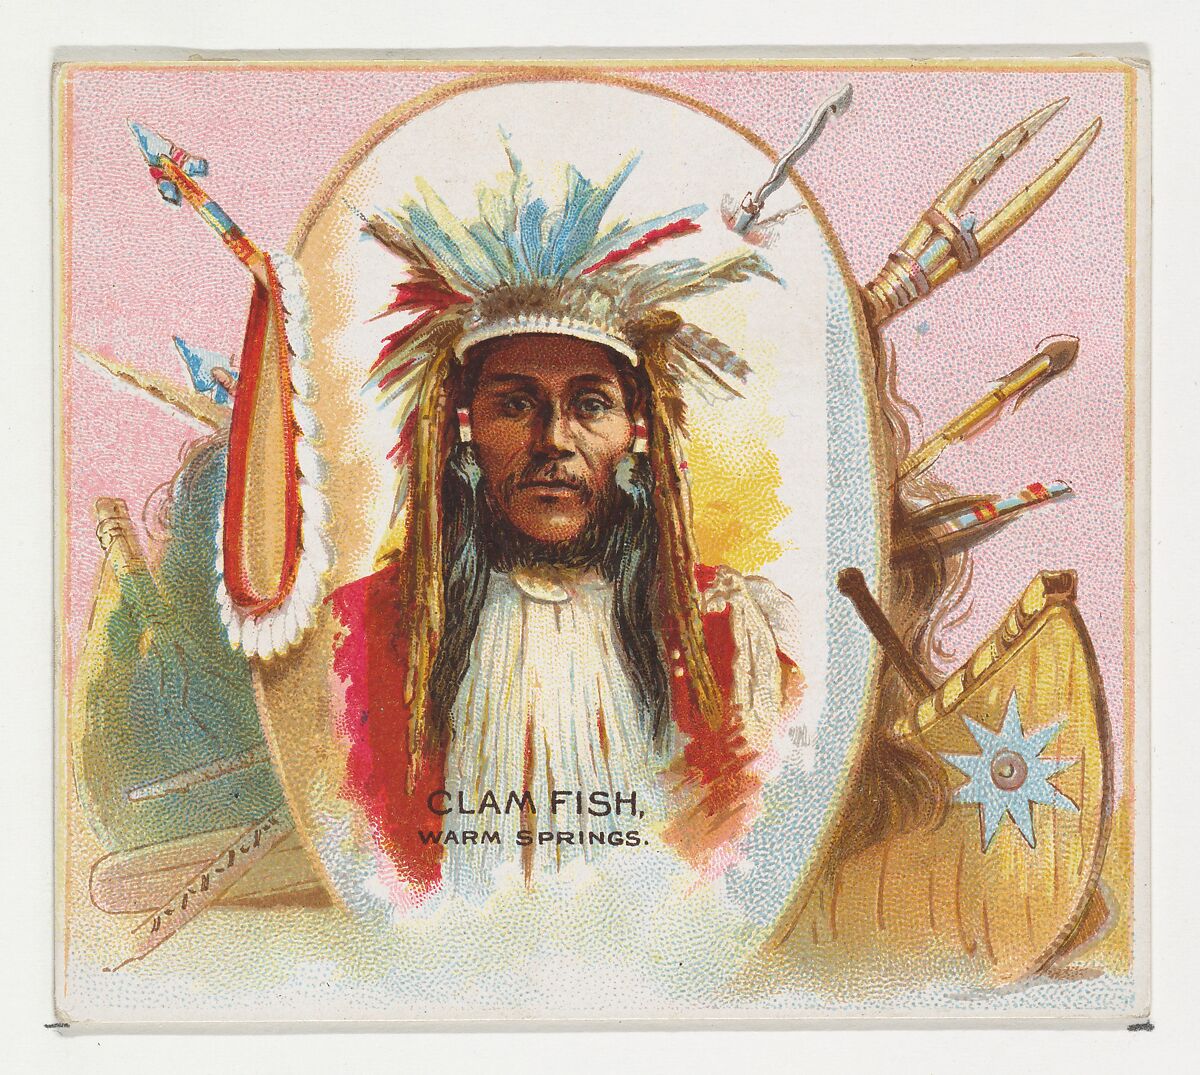 Clam Fish, Warm Springs, from the American Indian Chiefs series (N36) for Allen & Ginter Cigarettes, Issued by Allen &amp; Ginter (American, Richmond, Virginia), Commercial color lithograph 